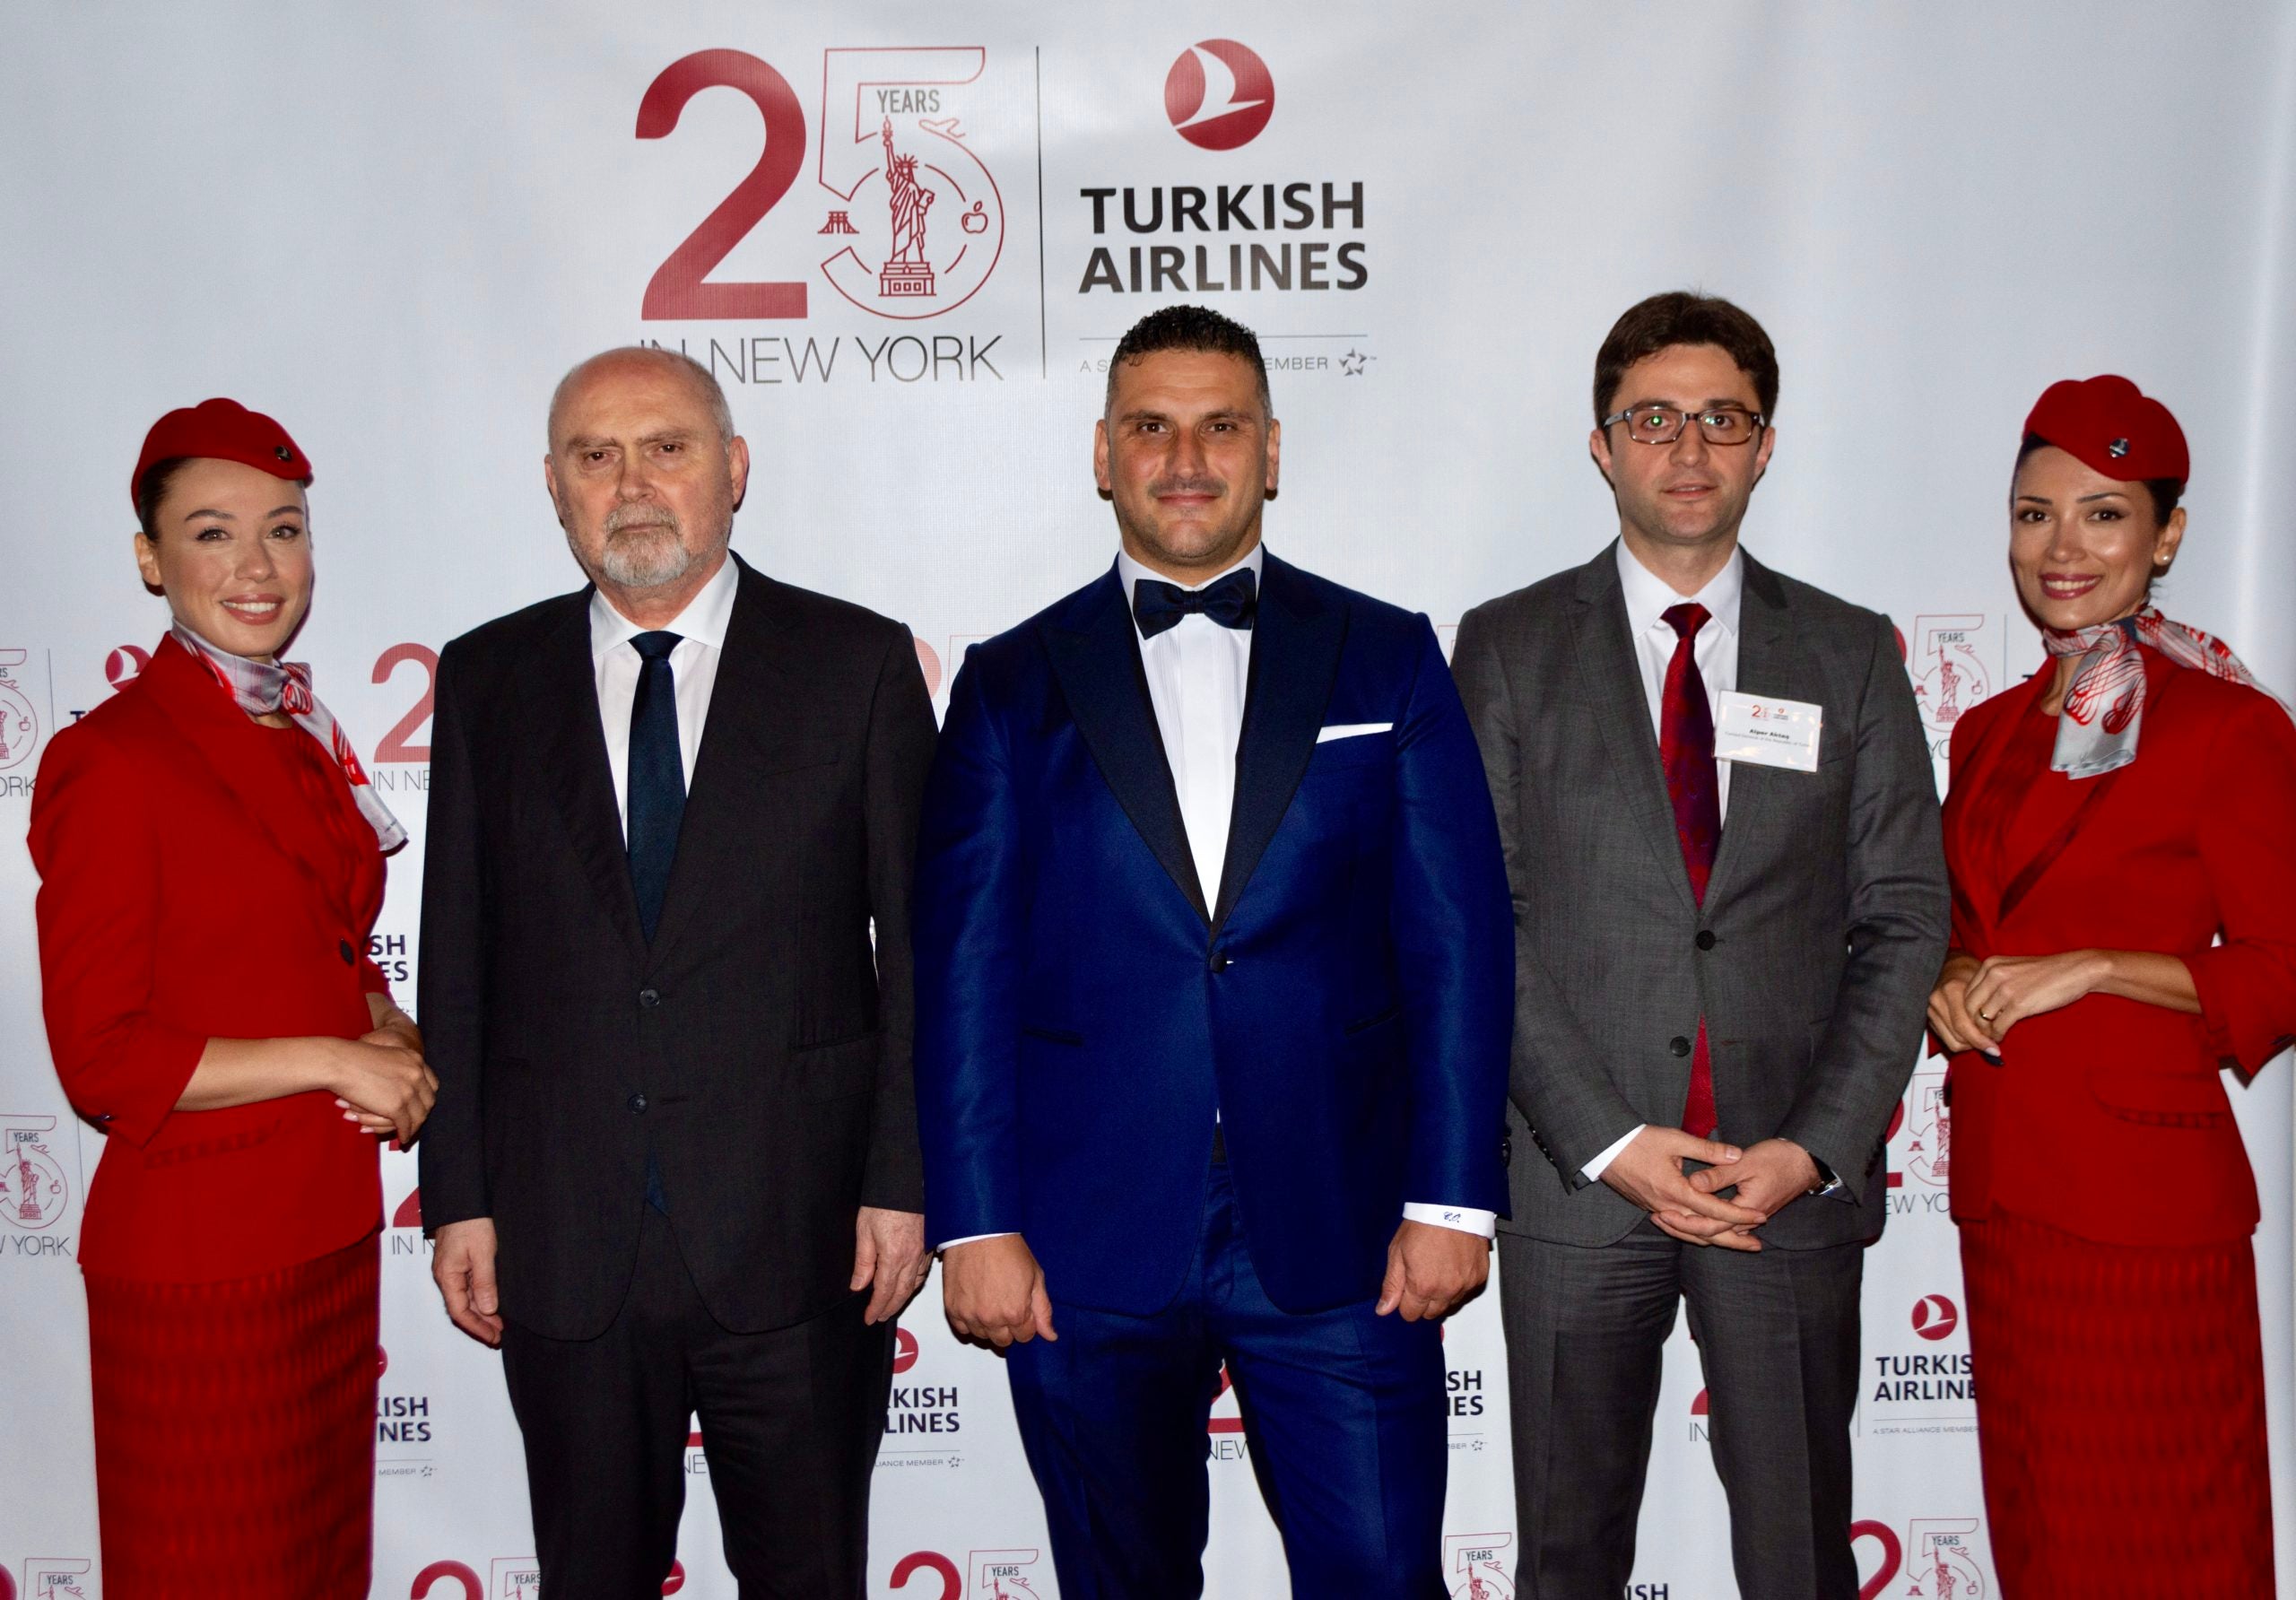 Turkish Airlines Celebrates 25 Years of Direct Flights to NYC